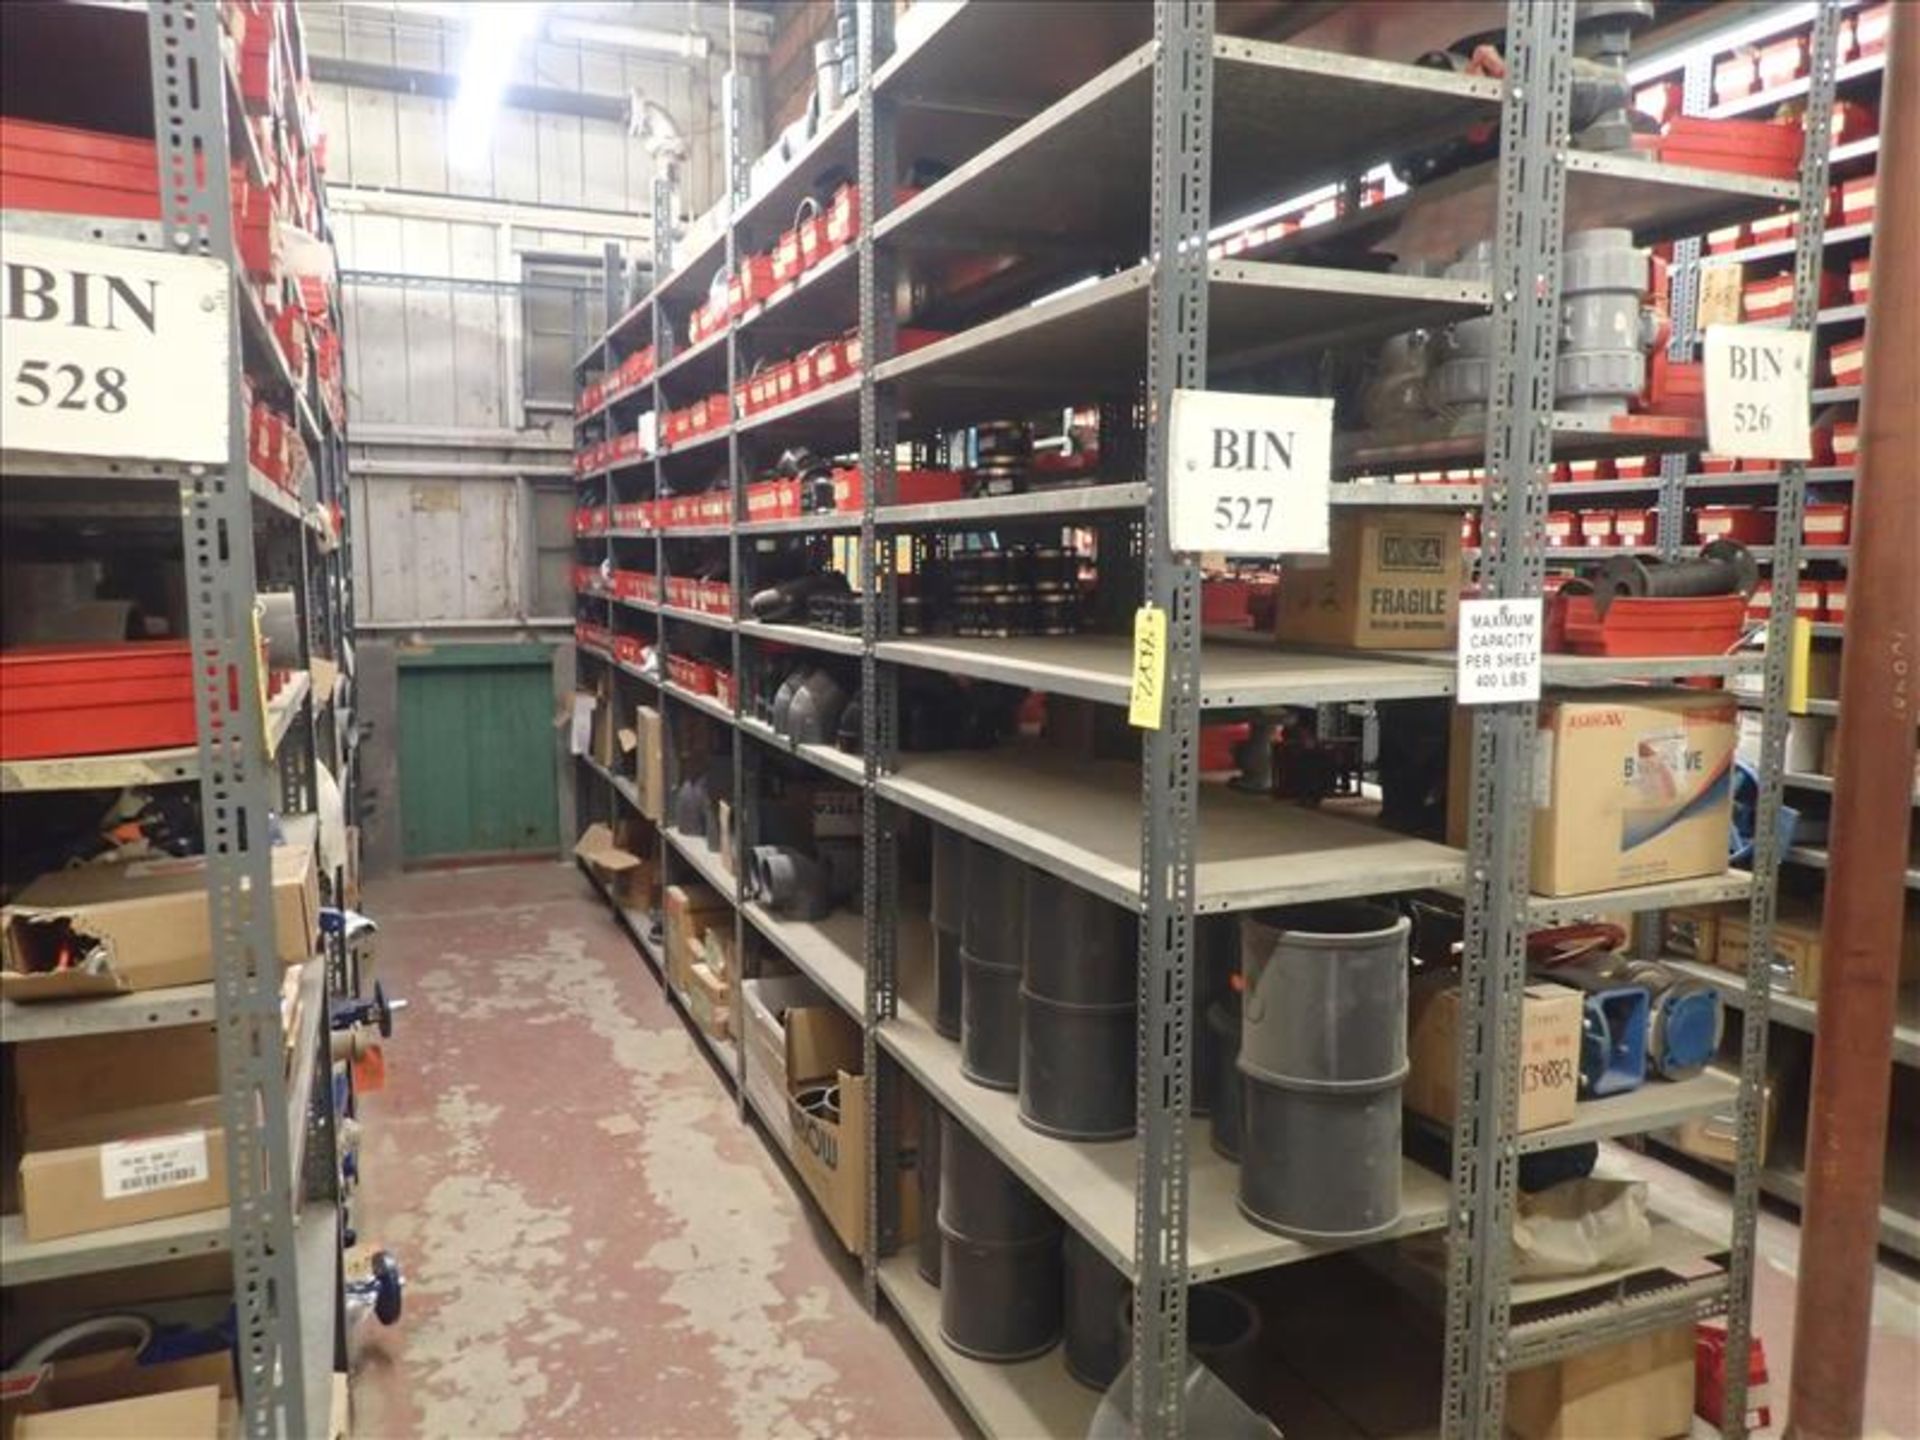 contents of shelving: piping, pipe fittings, spare parts, etc. (Bin 527) (Tag 8022 Loc WH South)